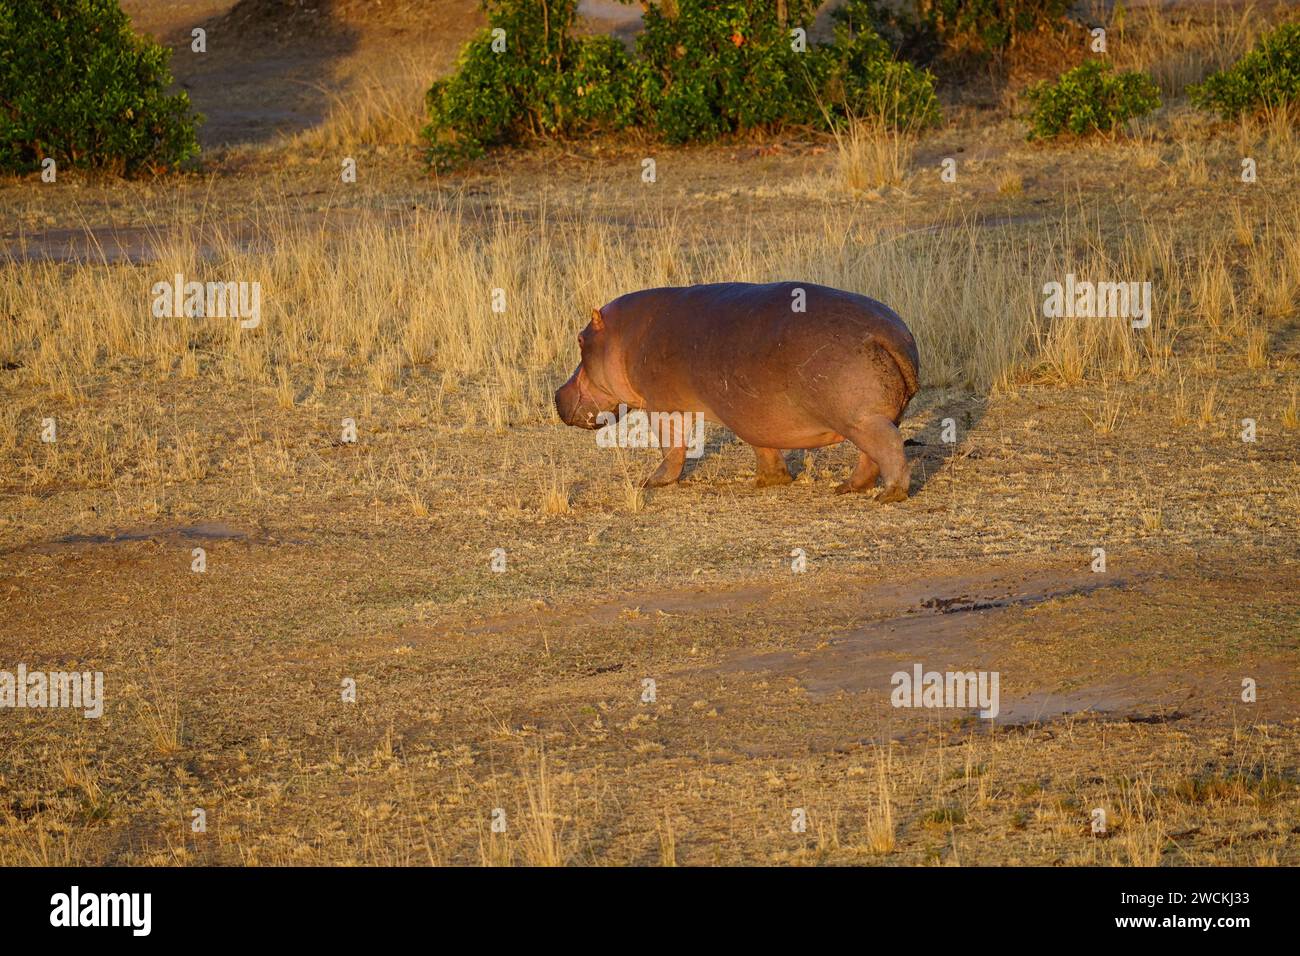 hippo walking on grass, african wilderness Stock Photo